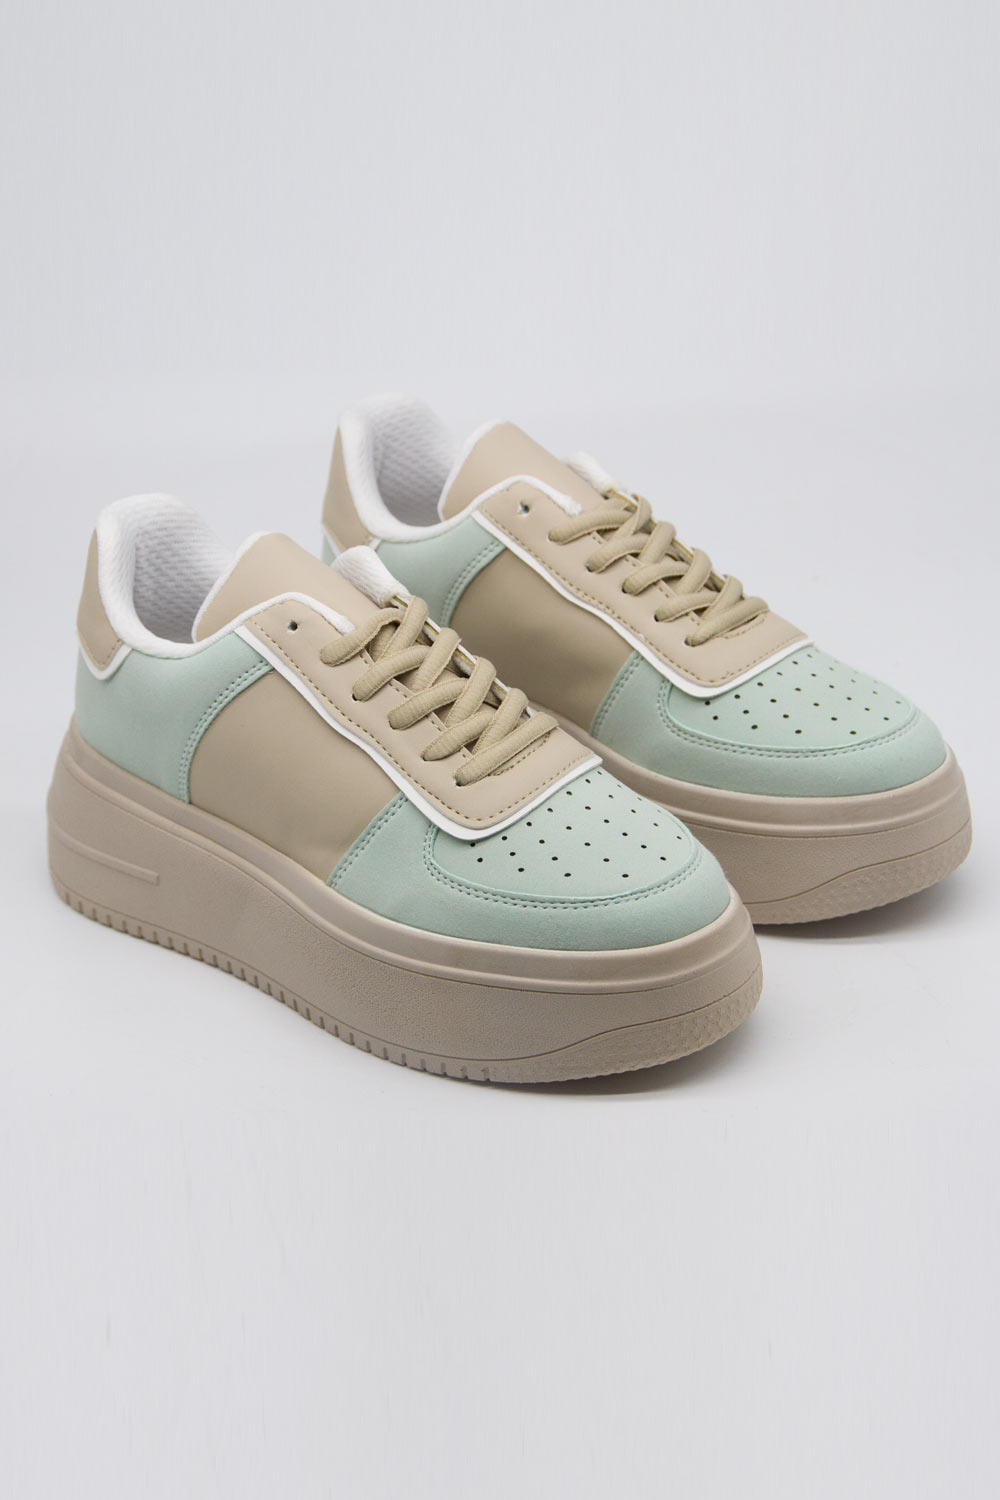 Thick Sole Lace-Up Sport Shoes (Green-Beige)